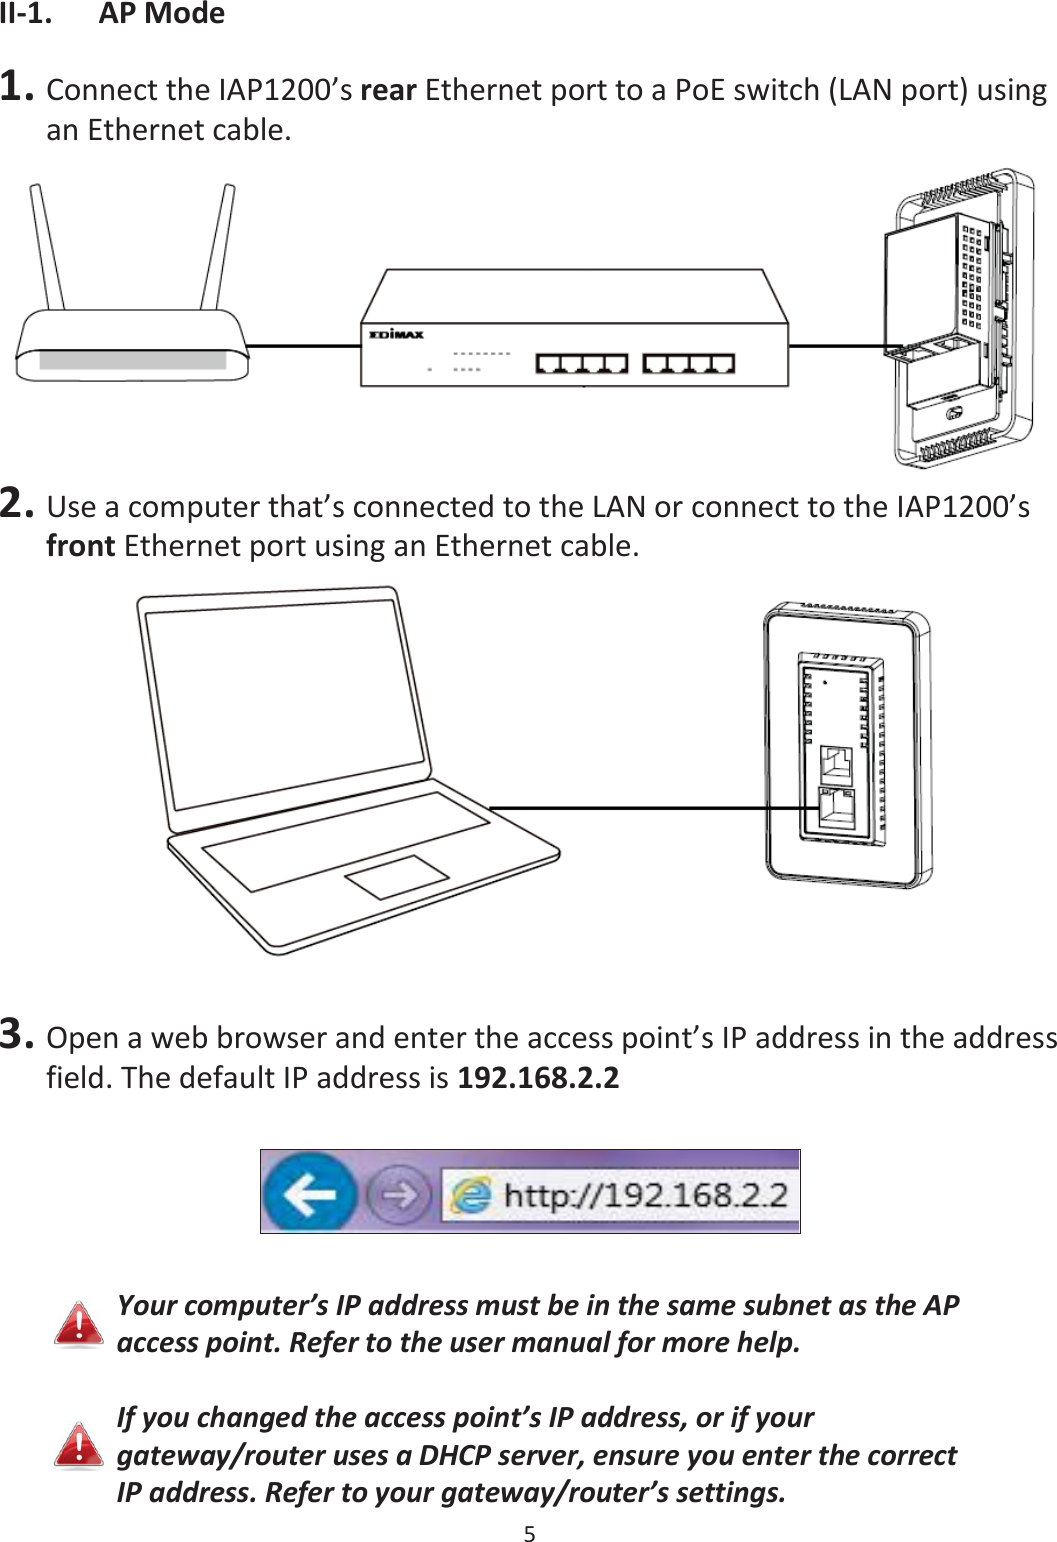 5  II-1. AP Mode  1. Connect the IAP1200’s rear Ethernet port to a PoE switch (LAN port) using an Ethernet cable.  2. Use a computer that’s connected to the LAN or connect to the IAP1200’s front Ethernet port using an Ethernet cable.   3. Open a web browser and enter the access point’s IP address in the address field. The default IP address is 192.168.2.2    Your computer’s IP address must be in the same subnet as the AP access point. Refer to the user manual for more help.  If you changed the access point’s IP address, or if your gateway/router uses a DHCP server, ensure you enter the correct IP address. Refer to your gateway/router’s settings. 